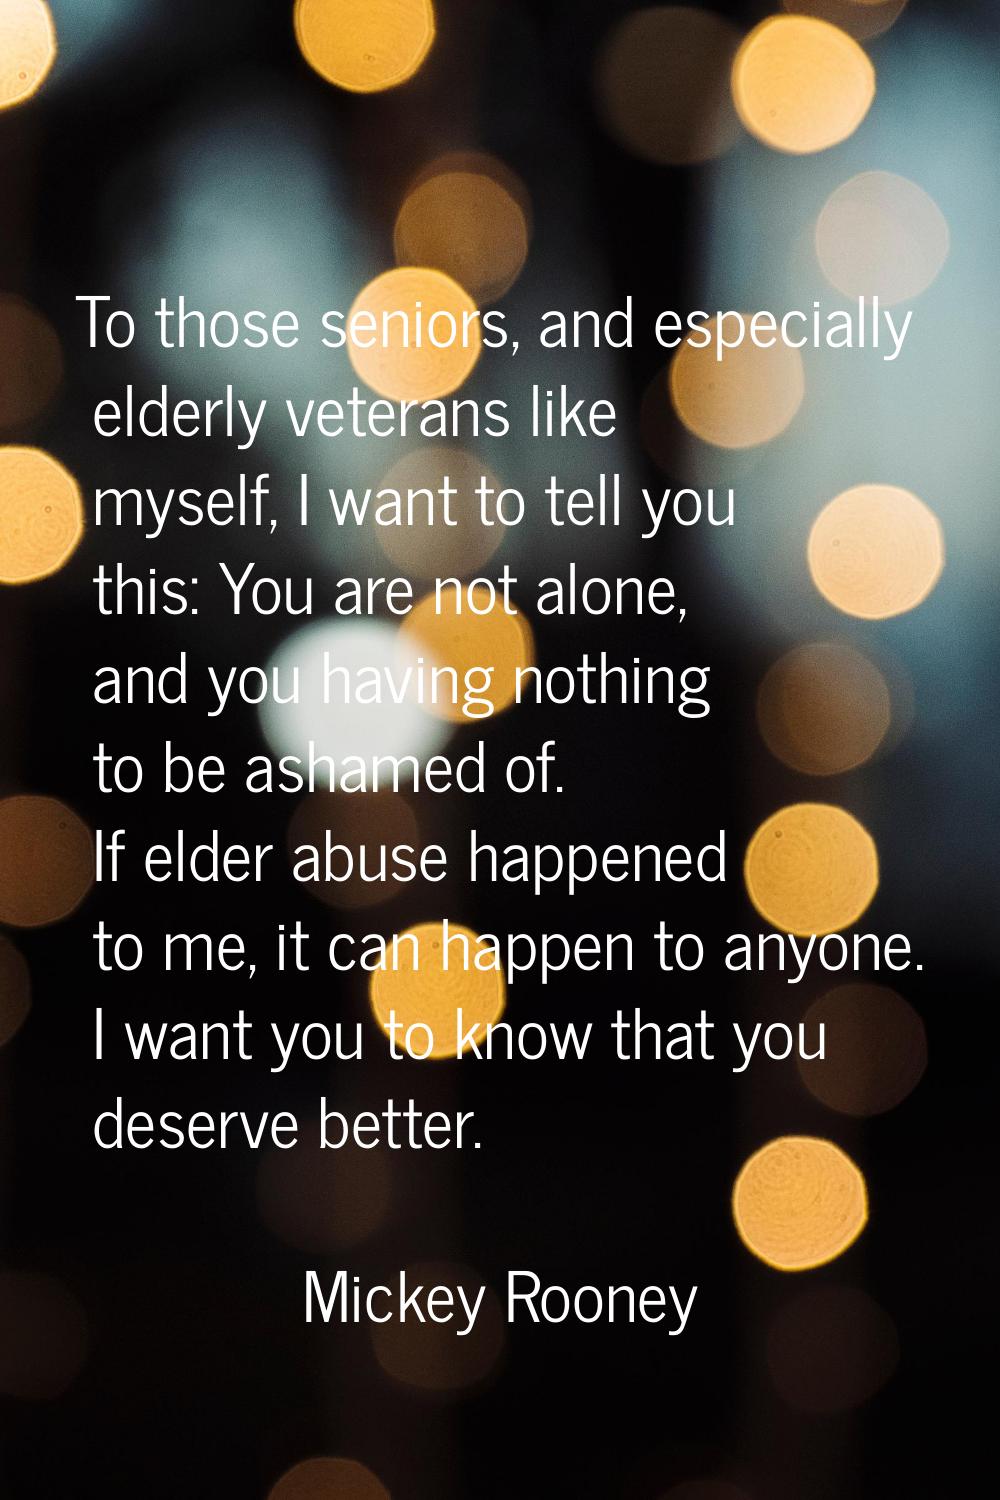 To those seniors, and especially elderly veterans like myself, I want to tell you this: You are not